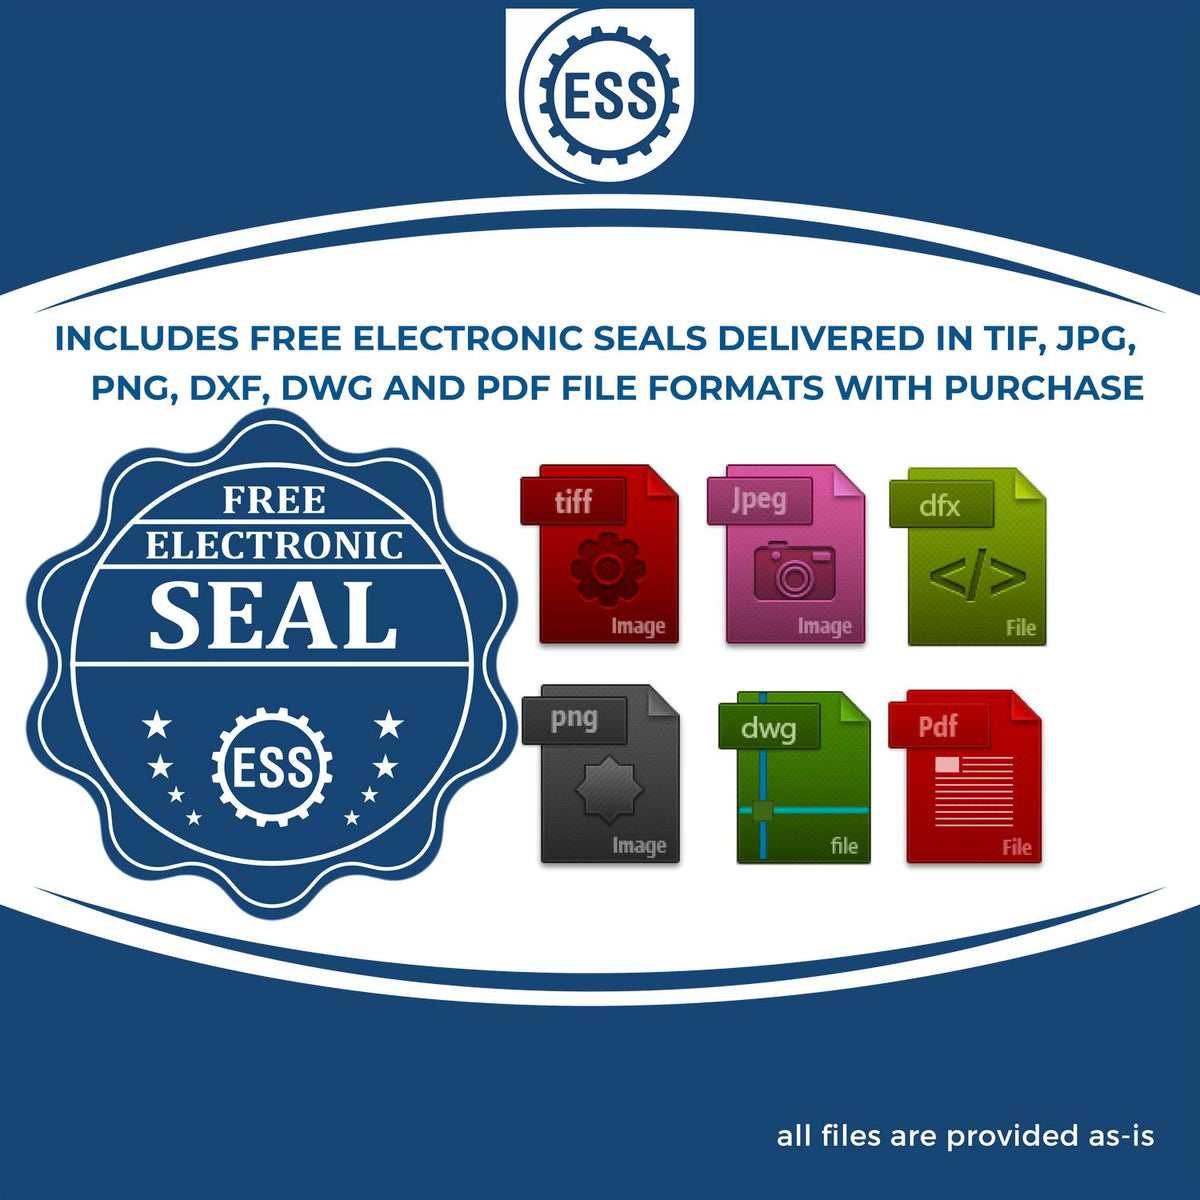 An infographic for the free electronic seal for the Premium MaxLight Pre-Inked Minnesota Landscape Architectural Stamp illustrating the different file type icons such as DXF, DWG, TIF, JPG and PNG.